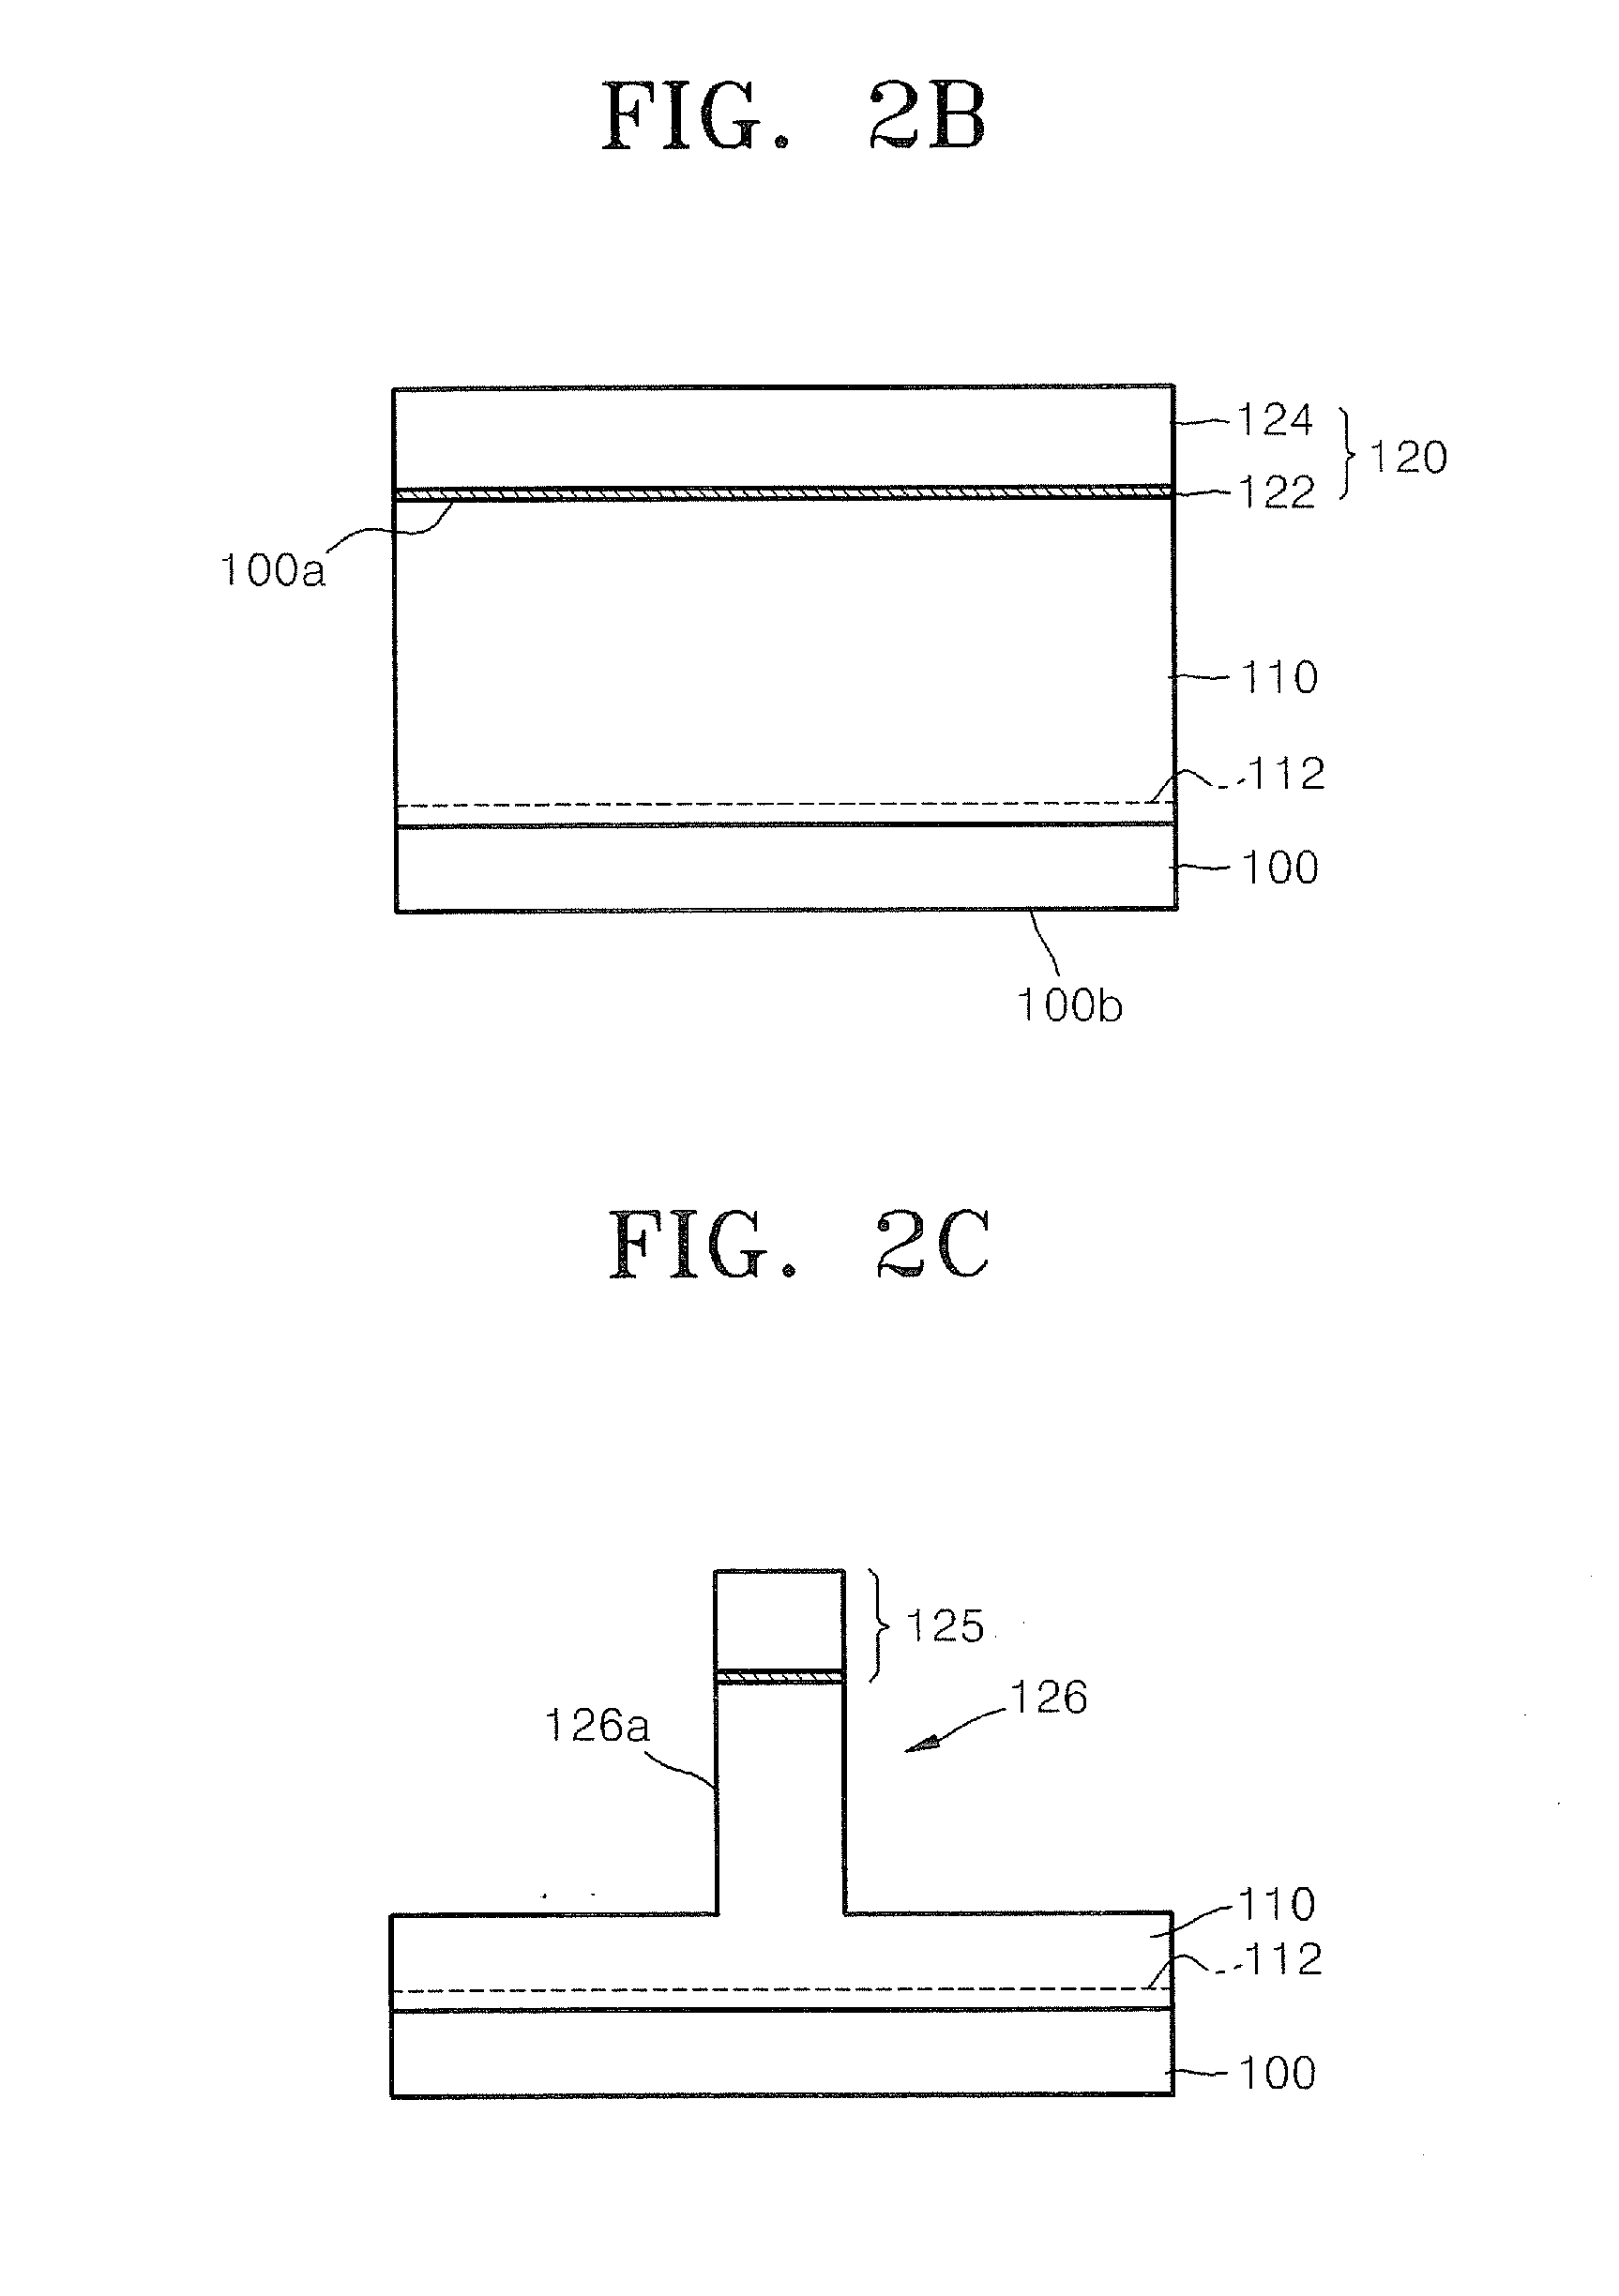 Methods of Forming Field Effect Transistors and Capacitor-Free Dynamic Random Access Memory Cells